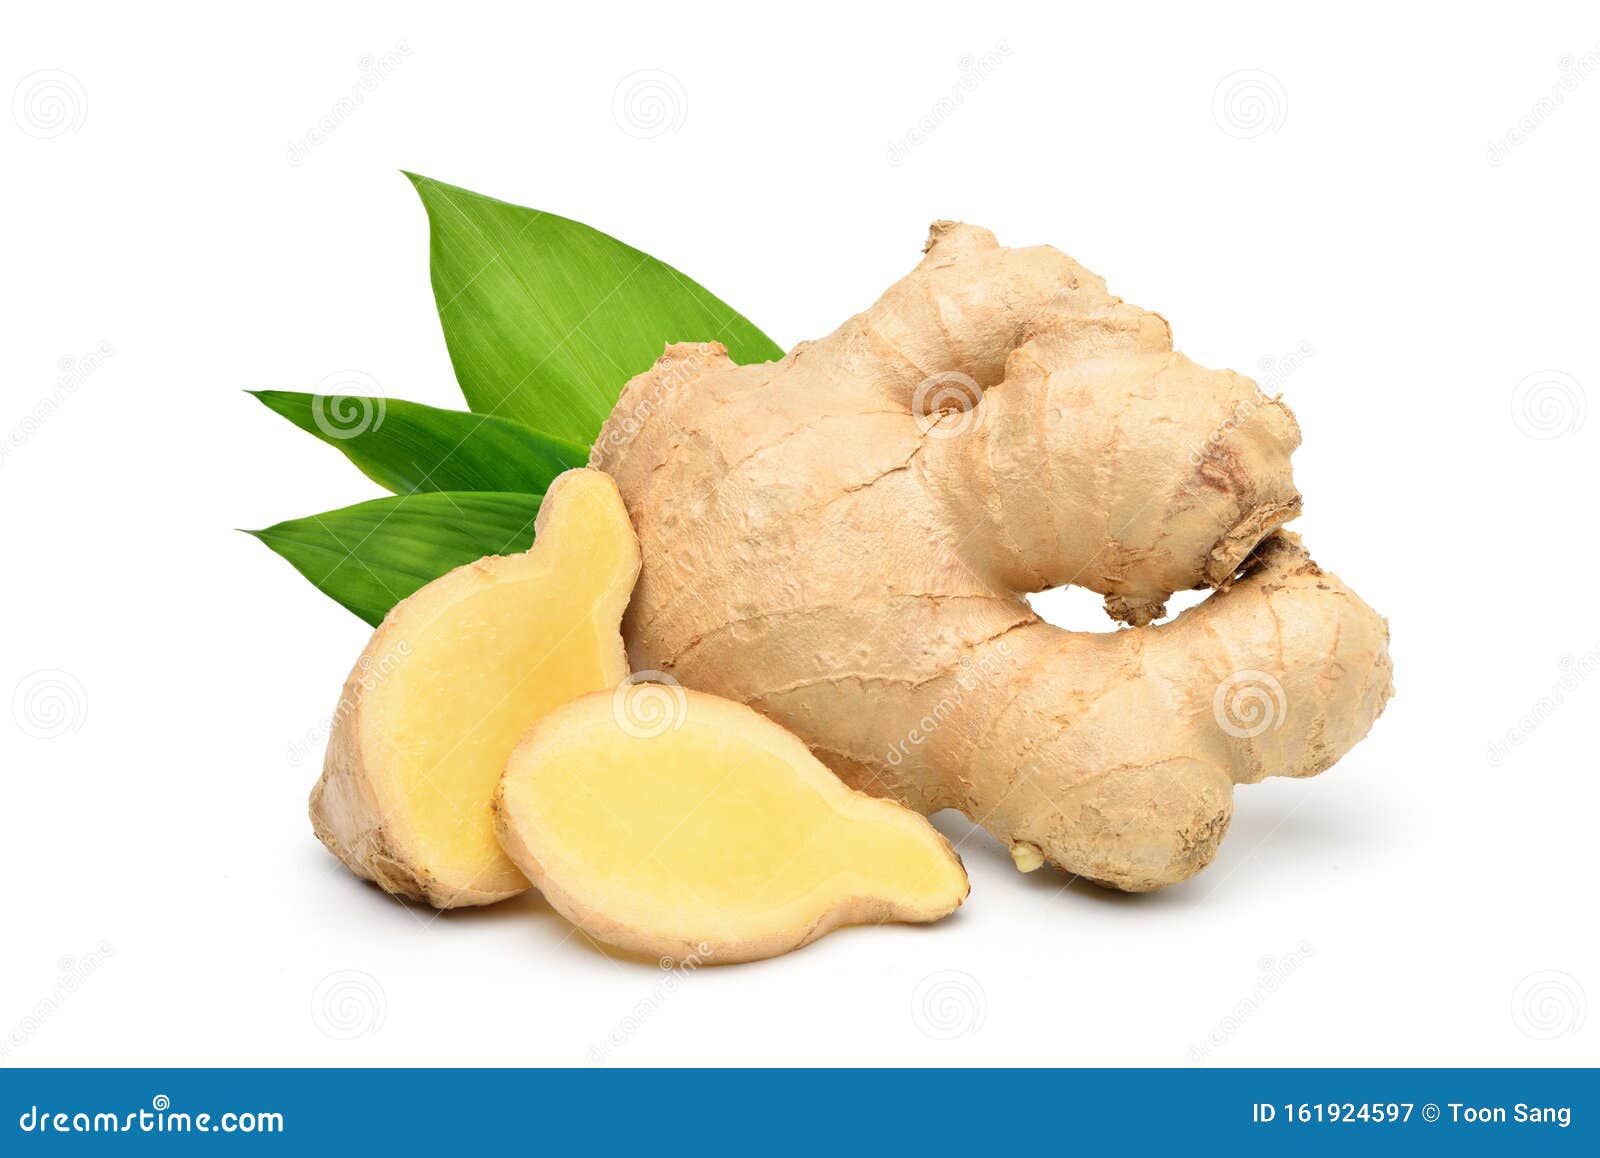 fresh ginger rhizome with sliced and green leaves